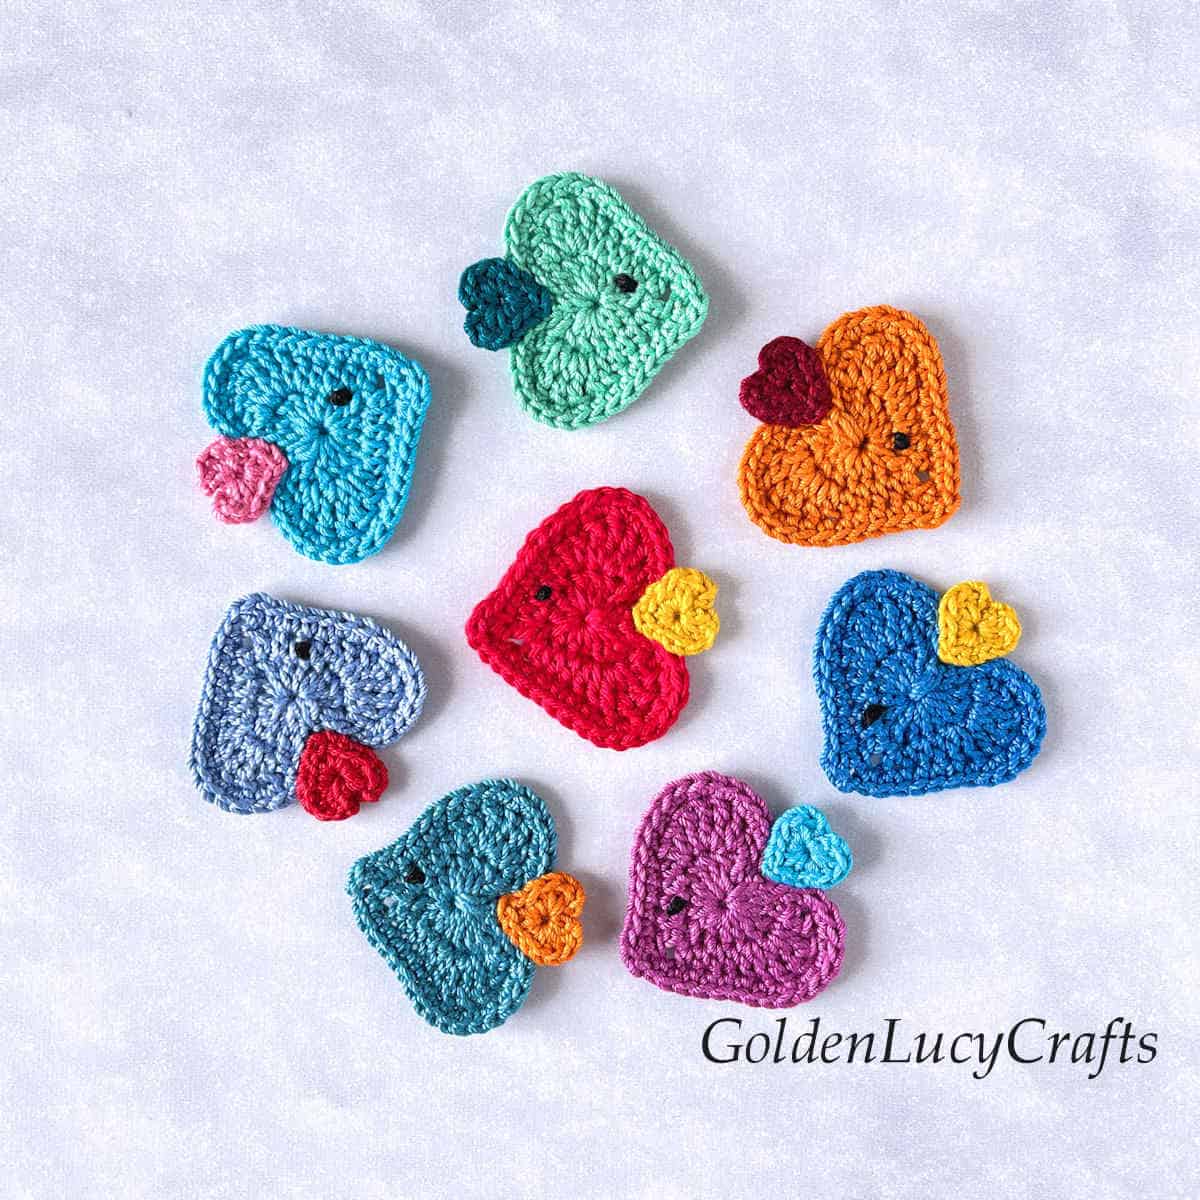 Eight crocheted heart-shaped fish appliques.